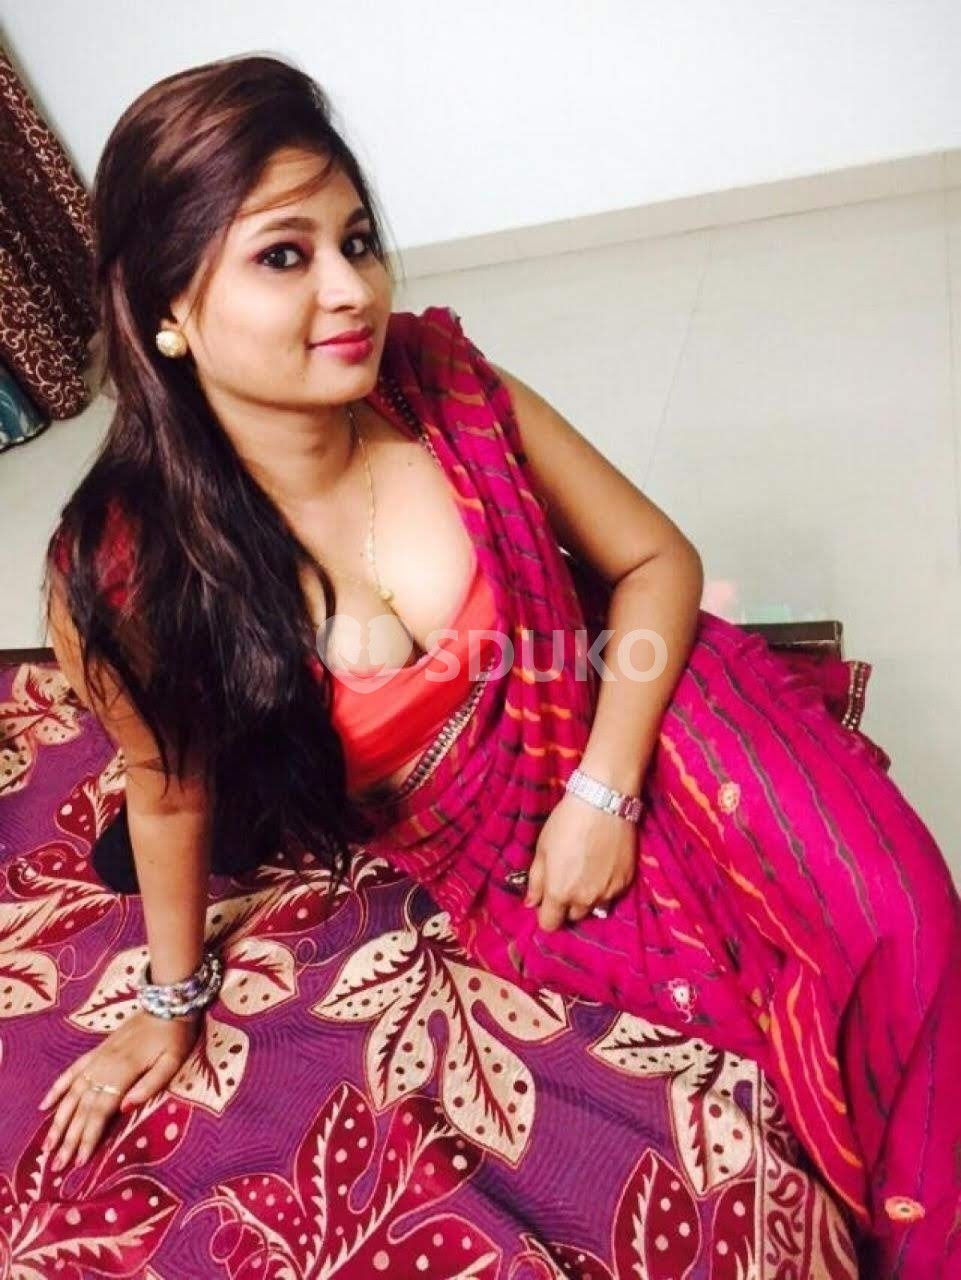 Madurai °✓ Sex All Enjoy°✓ call me provide best Genuine service All time available